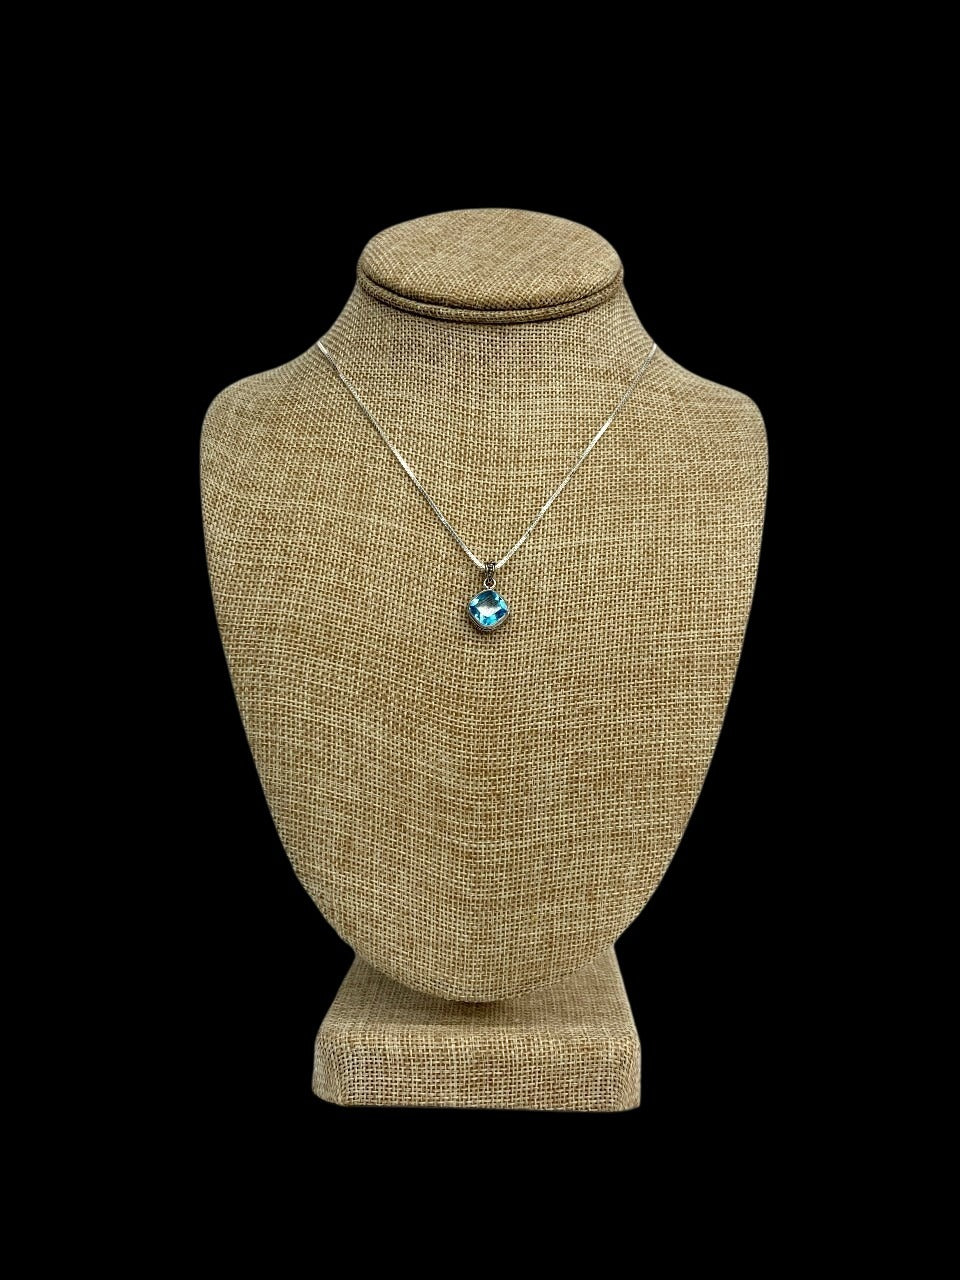 Blue Topaz And Sterling Silver Necklace